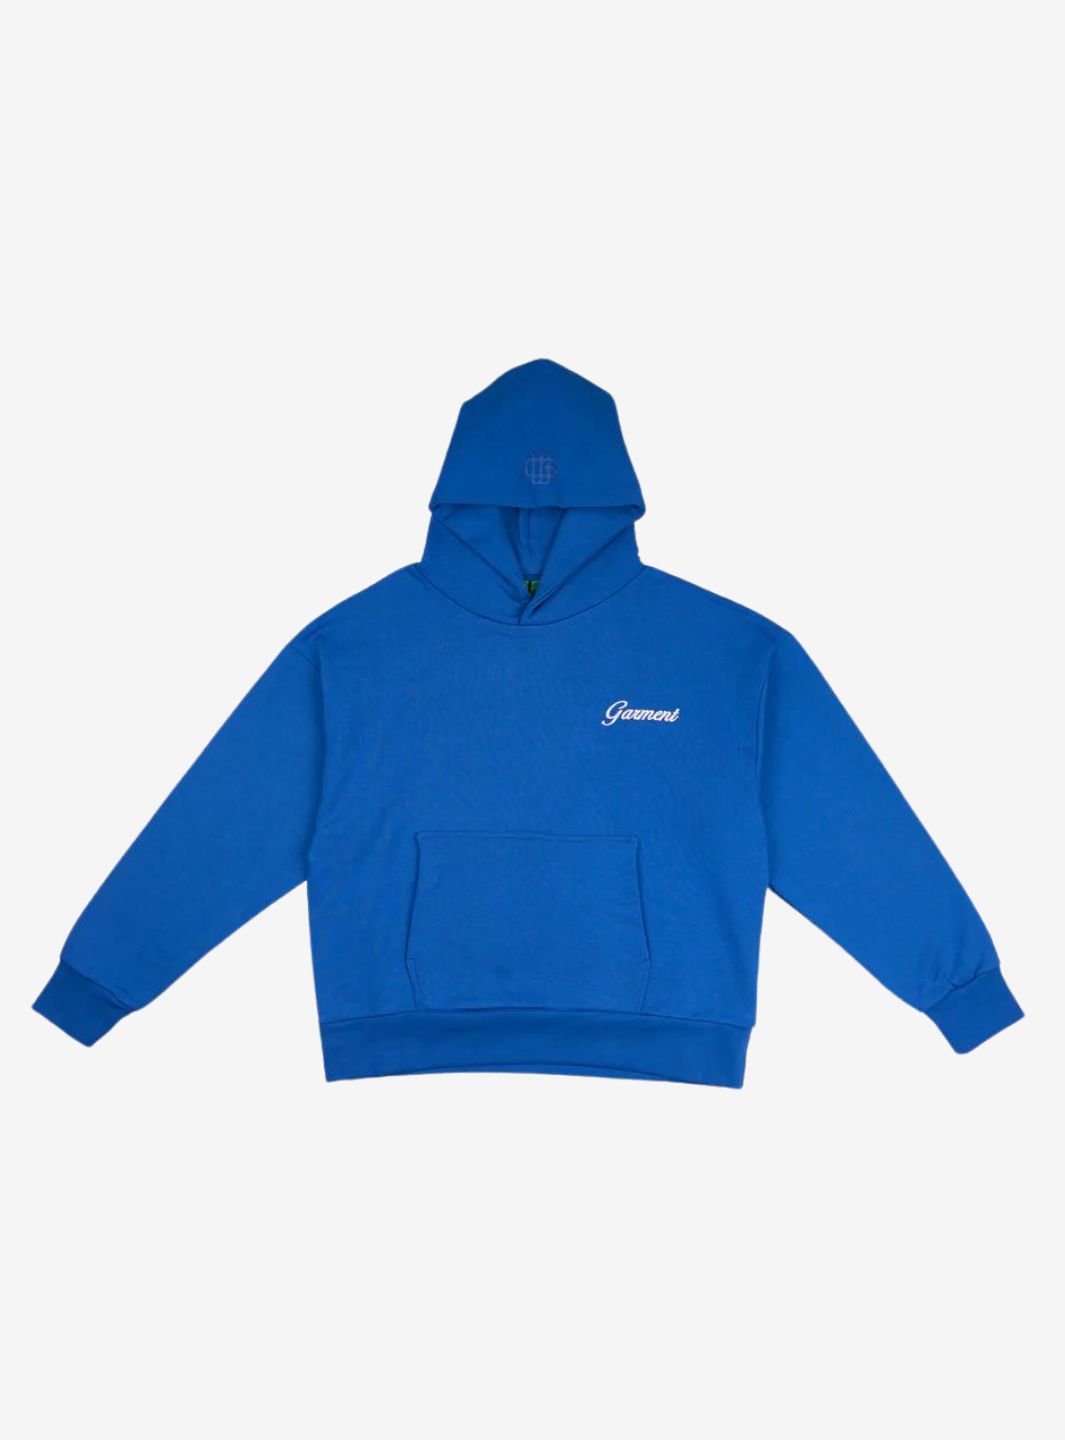 Garment Workshop Hoodie If You Know You Know Blue | ResellZone